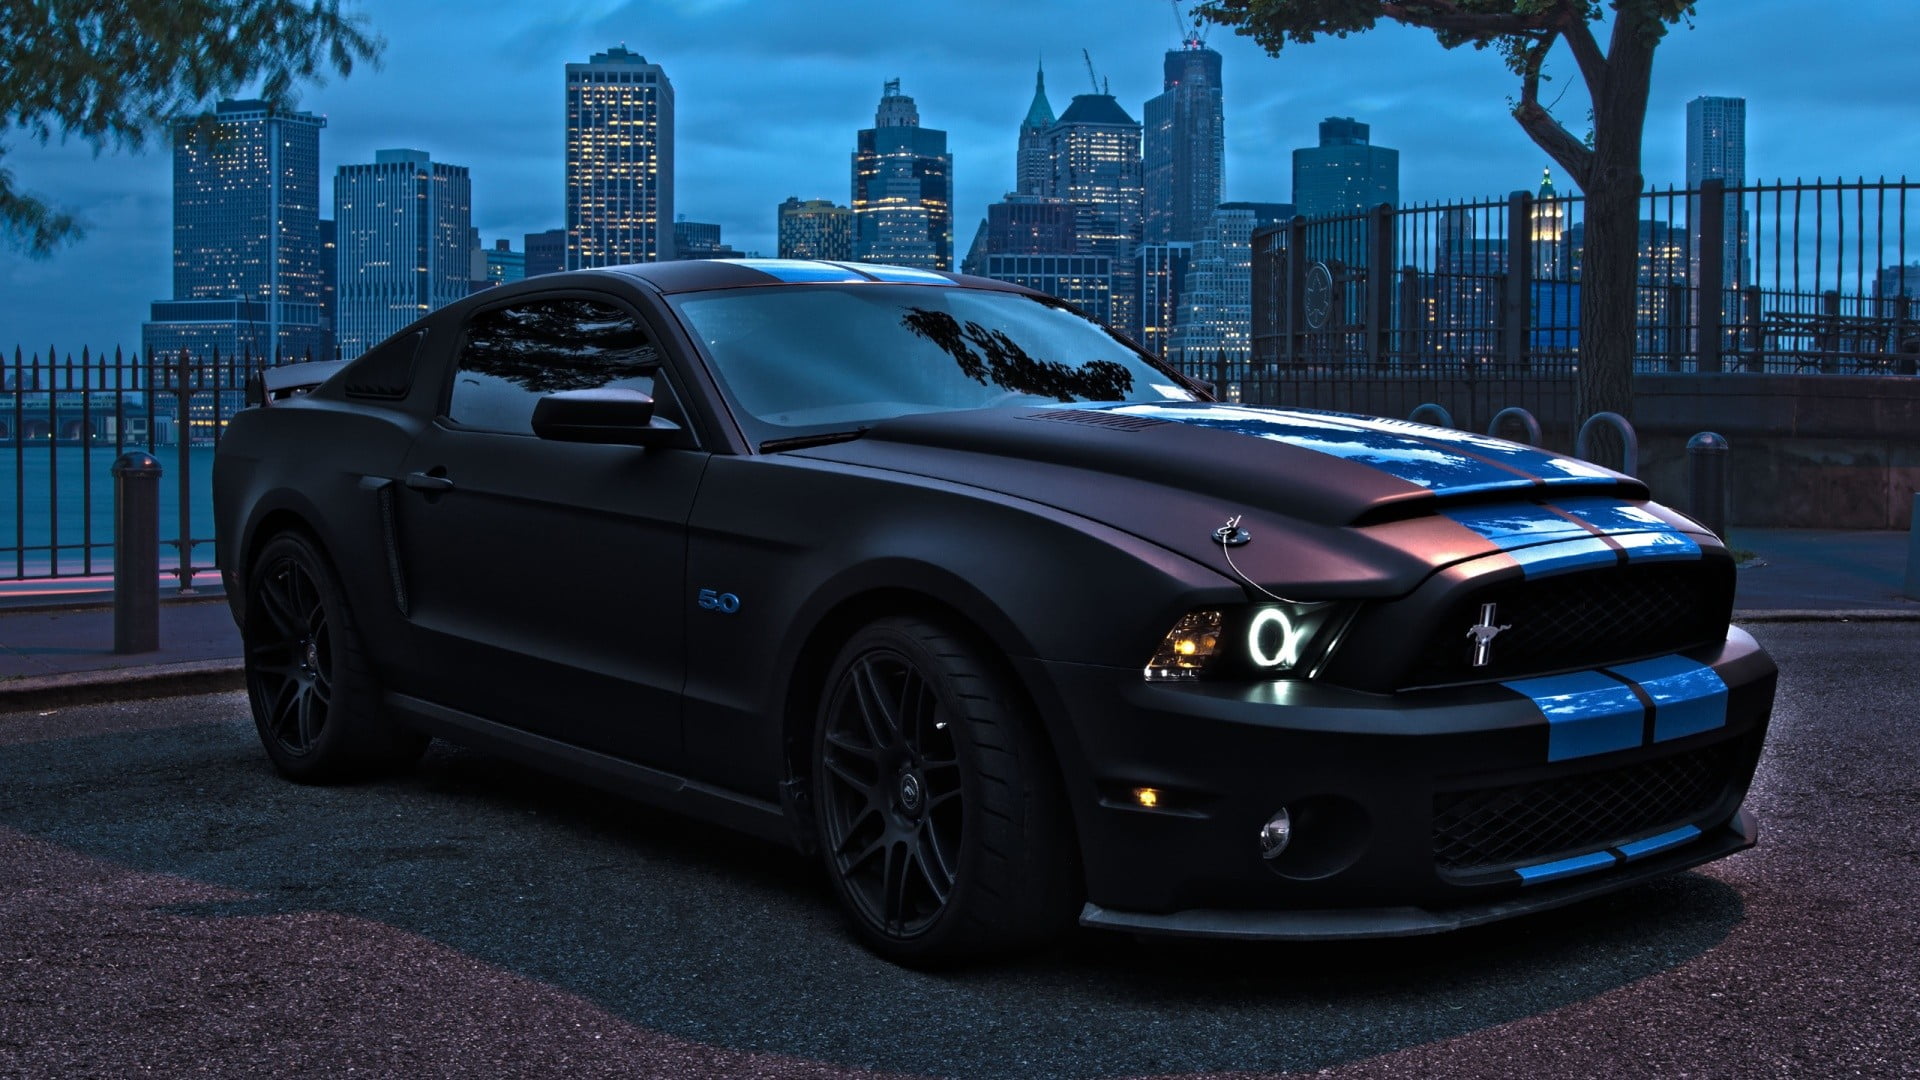 black coupe, blue and maroon Ford Mustang coupe on road during nighttime